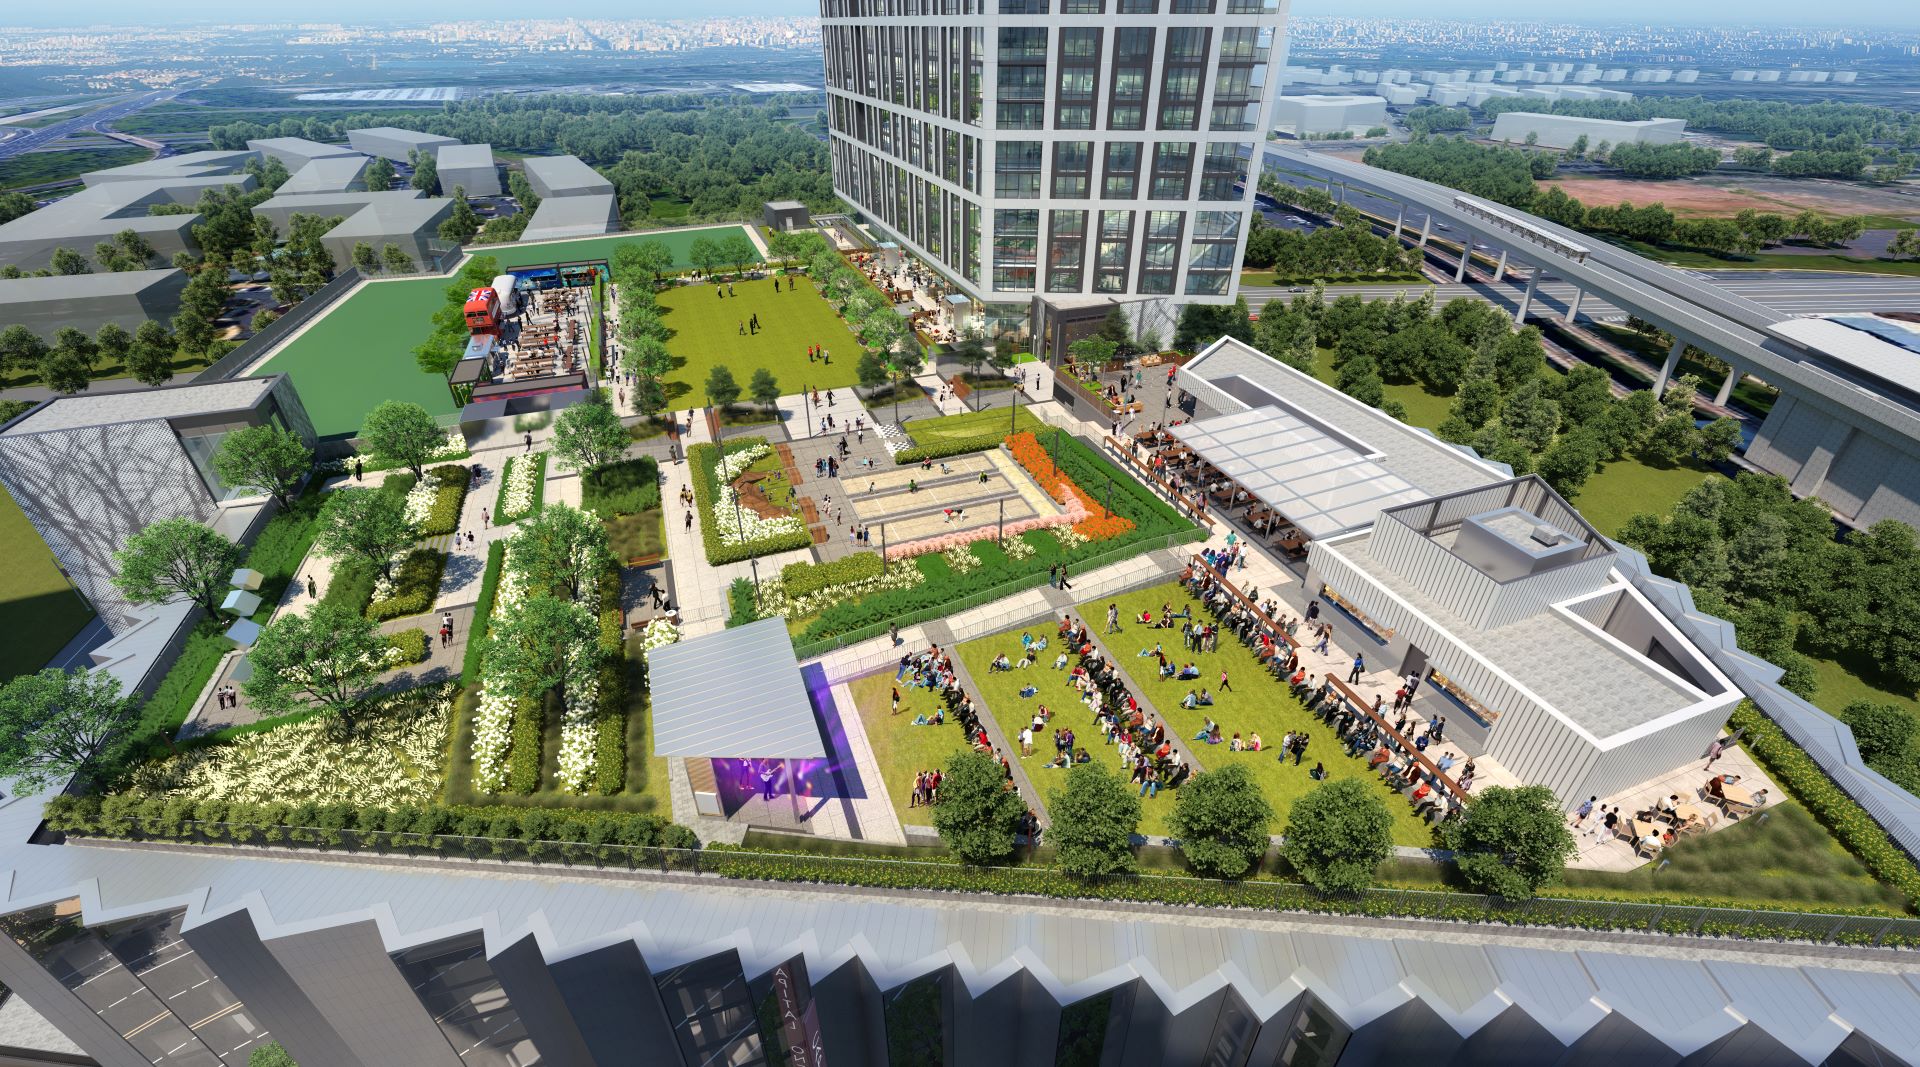 With revised Phase 2 plans, Tysons Corner Center builds on plaza